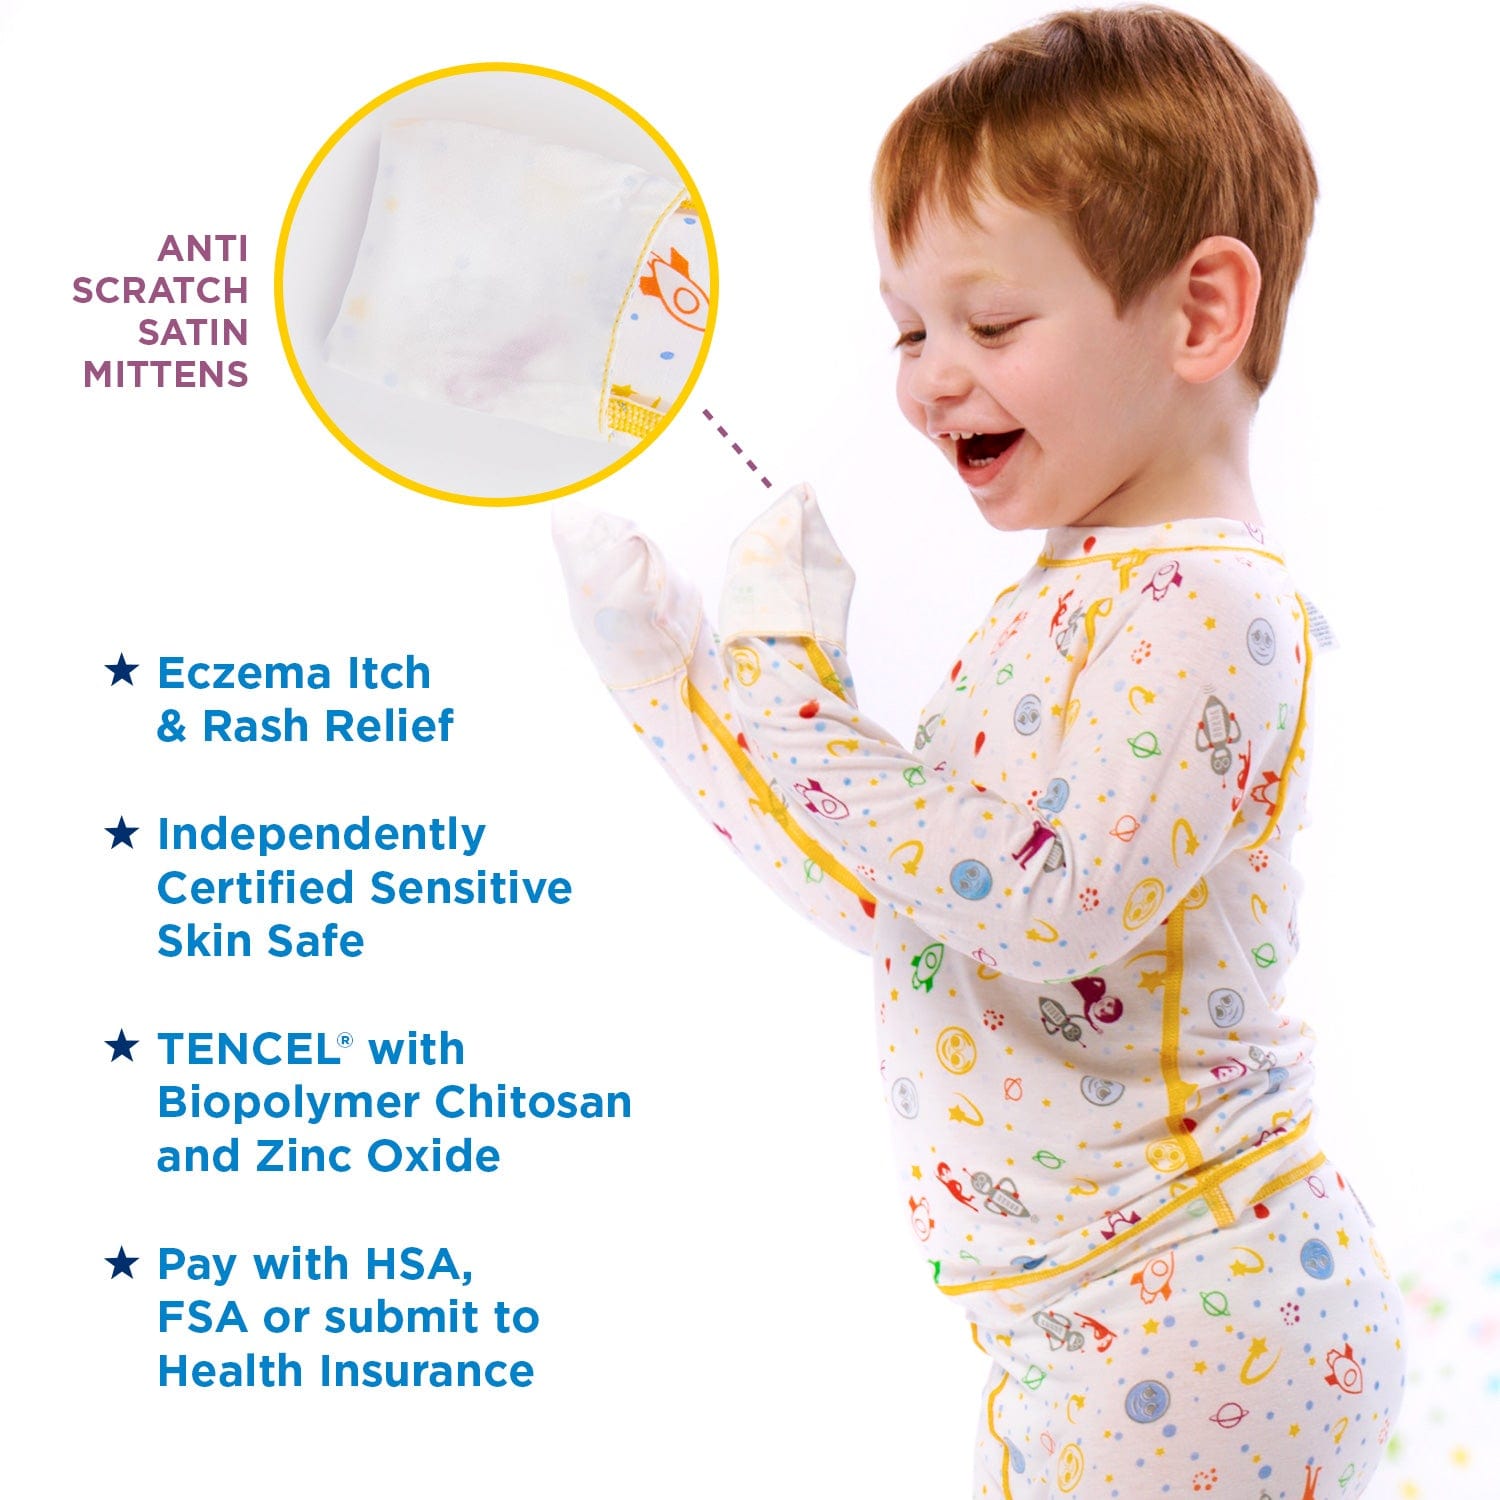 “Children's Eczema Pajama Sleep Shirt made from TENCEL Prevent scratching during sleep with Anti Scratch mitts”